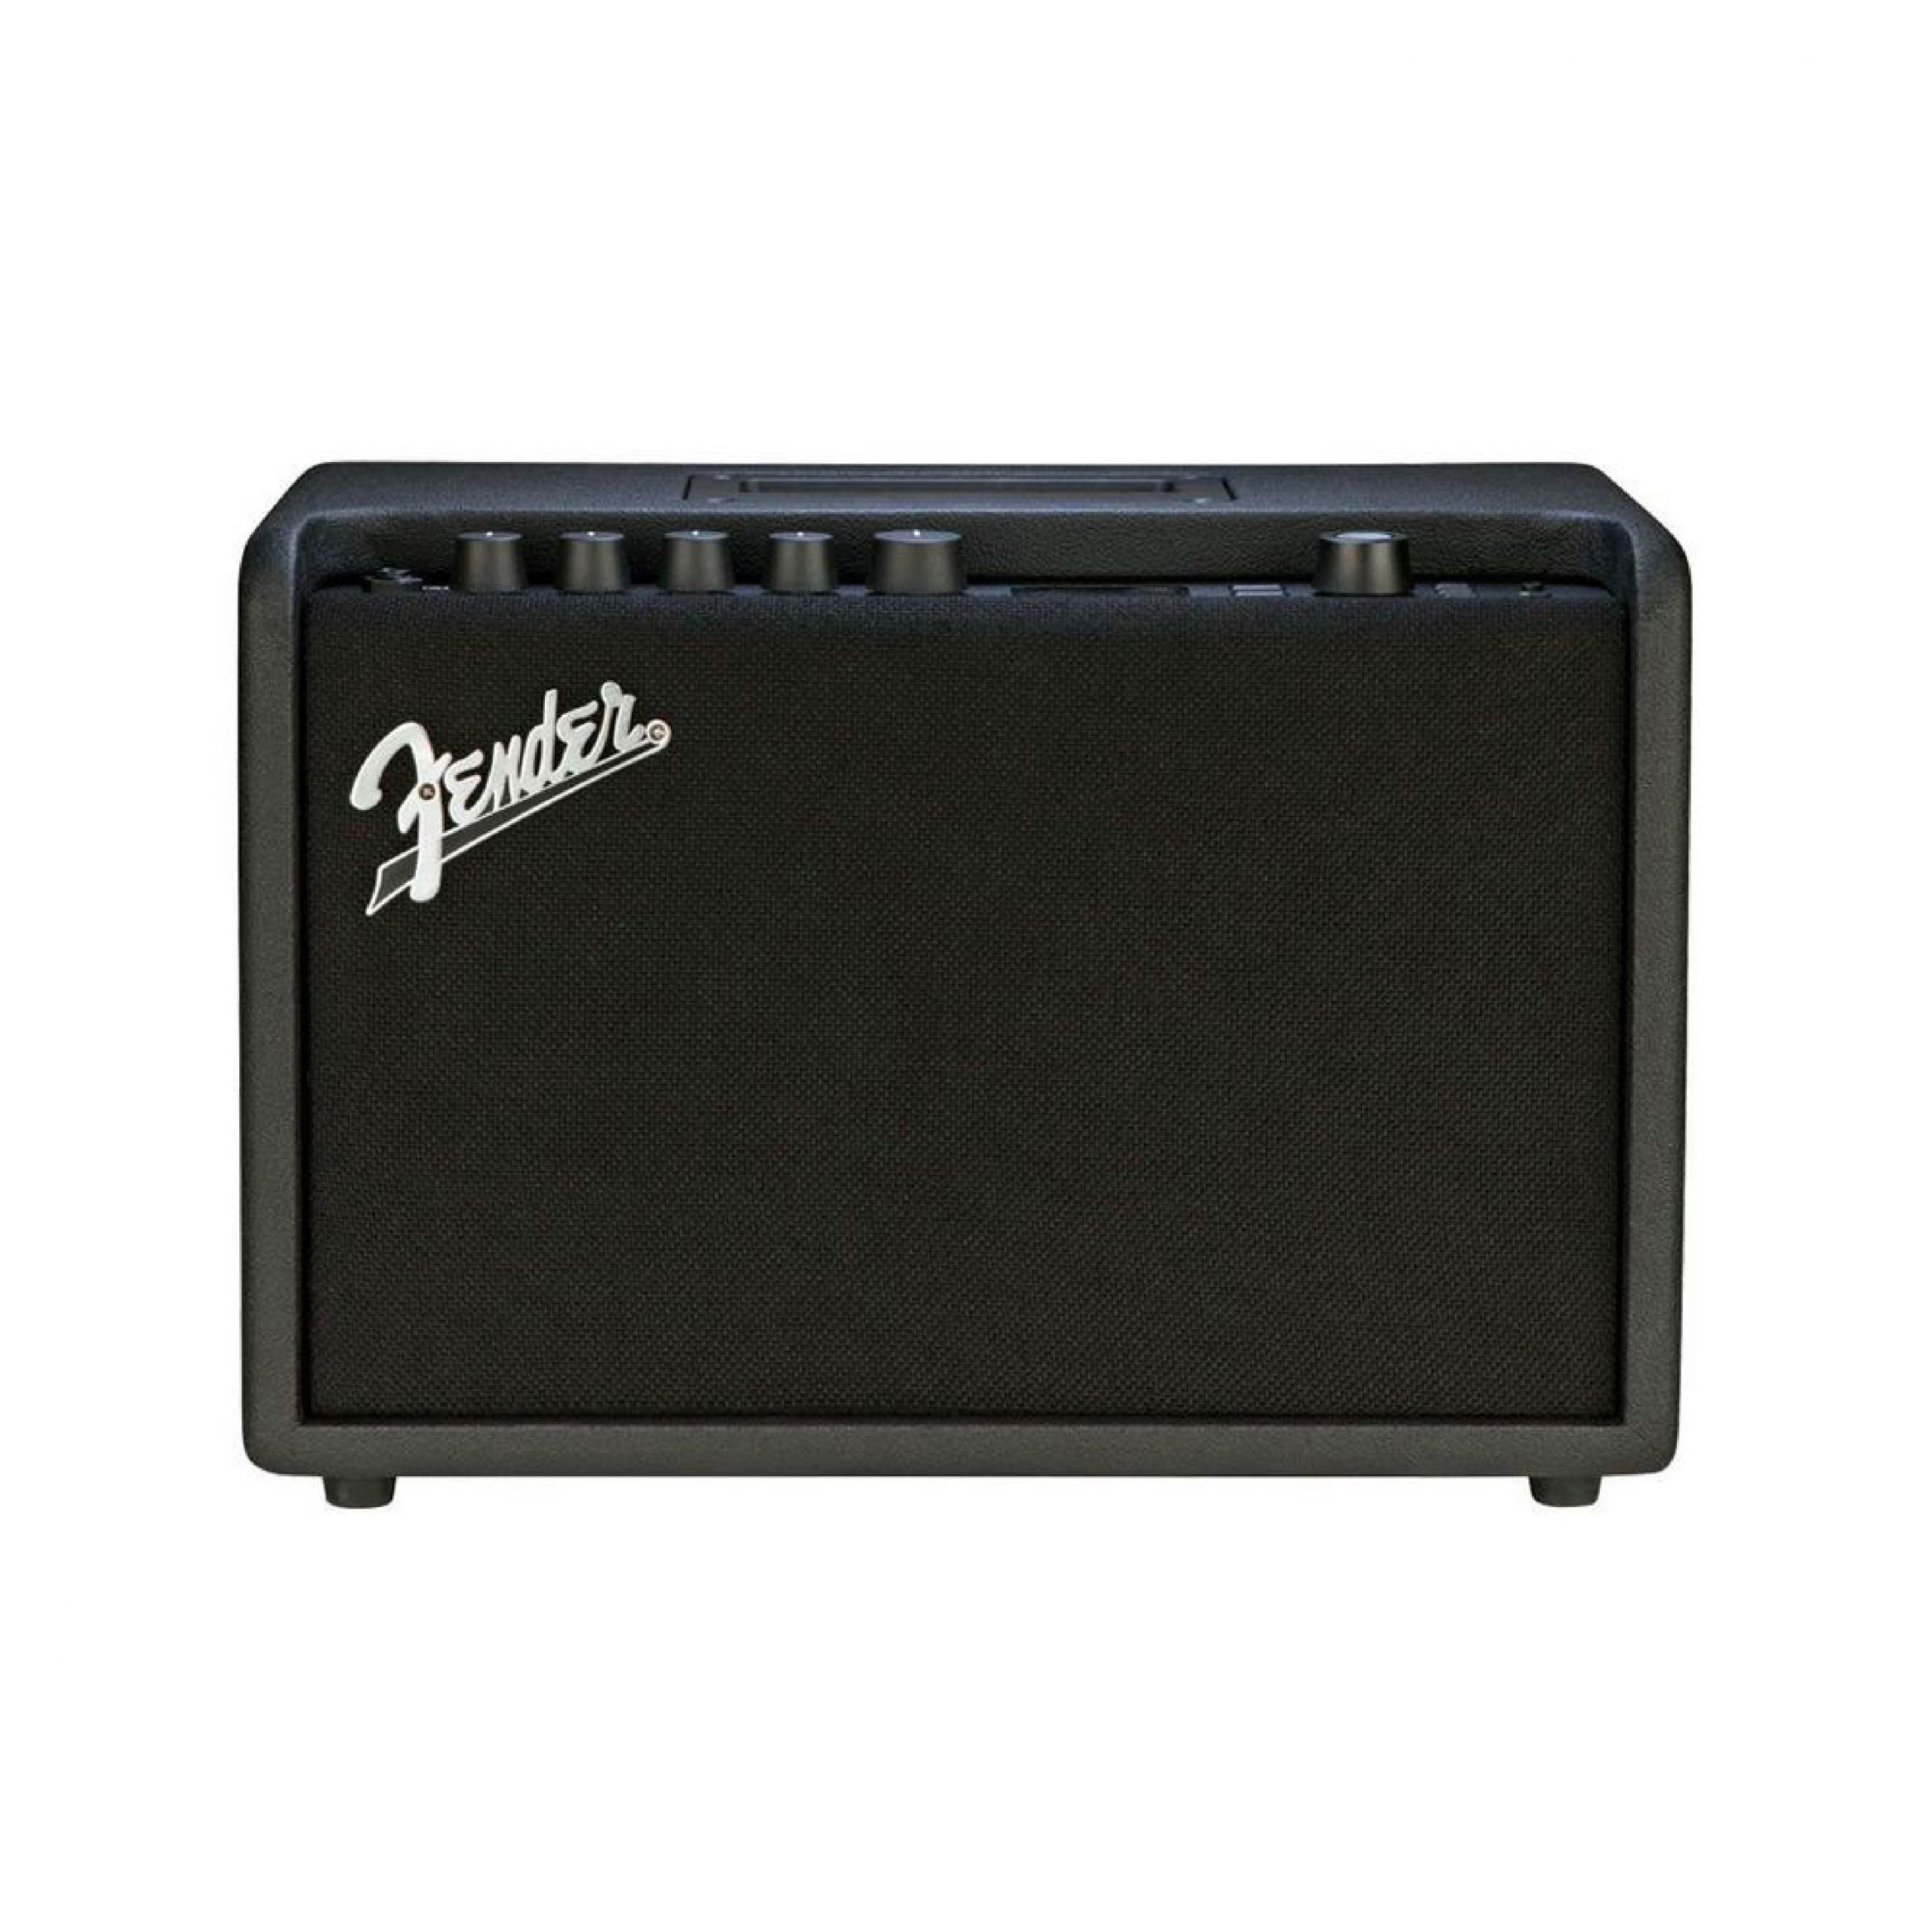 Fender-Engine Room Power Supply - Oosthavens Music